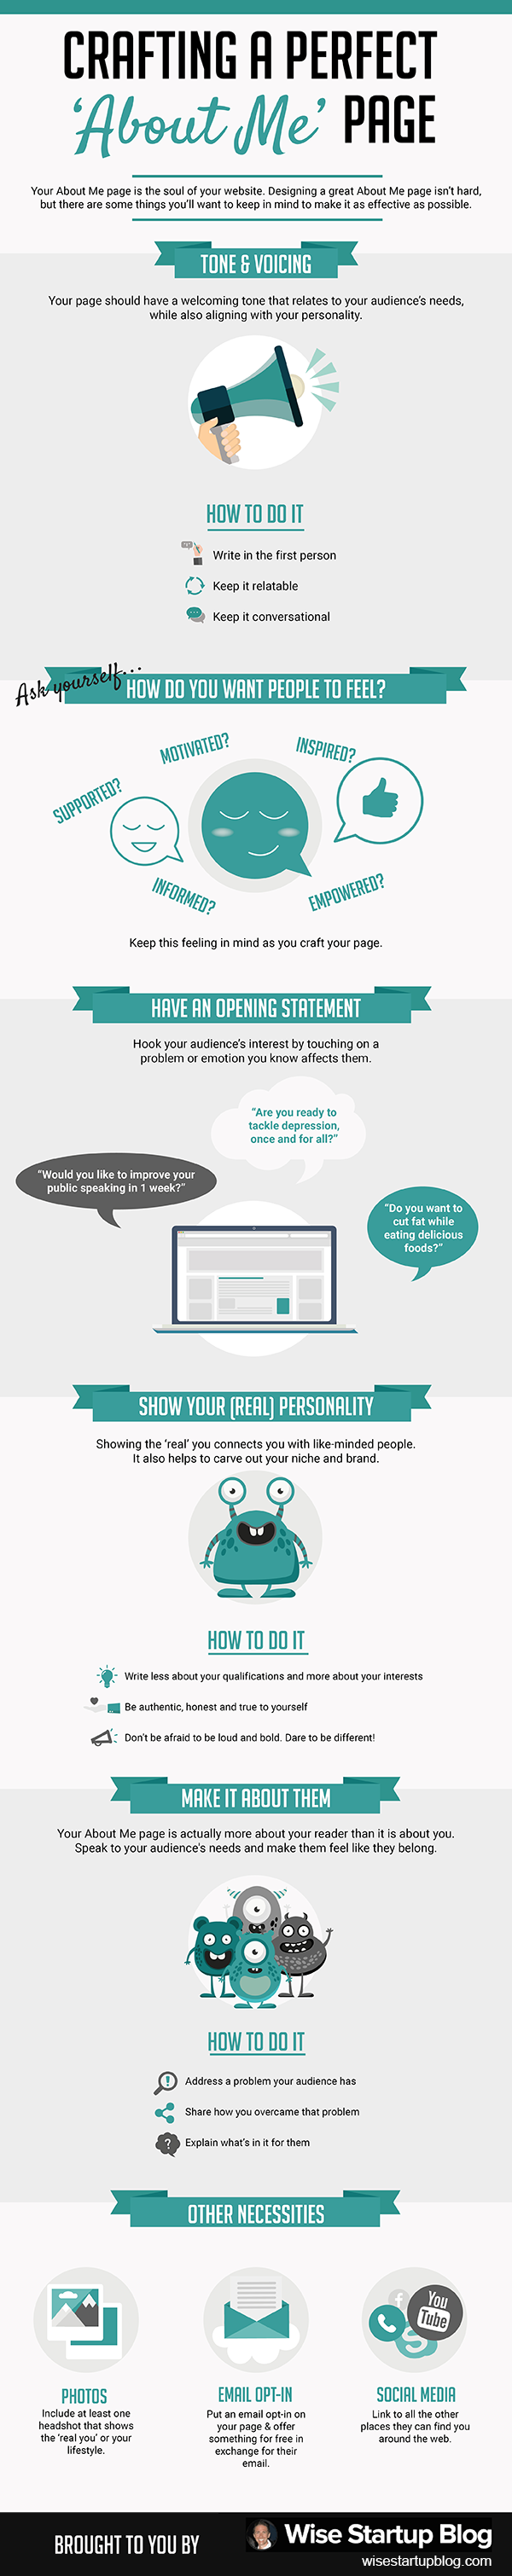 About Me Page: The Ultimate How to Guide [Infographic]